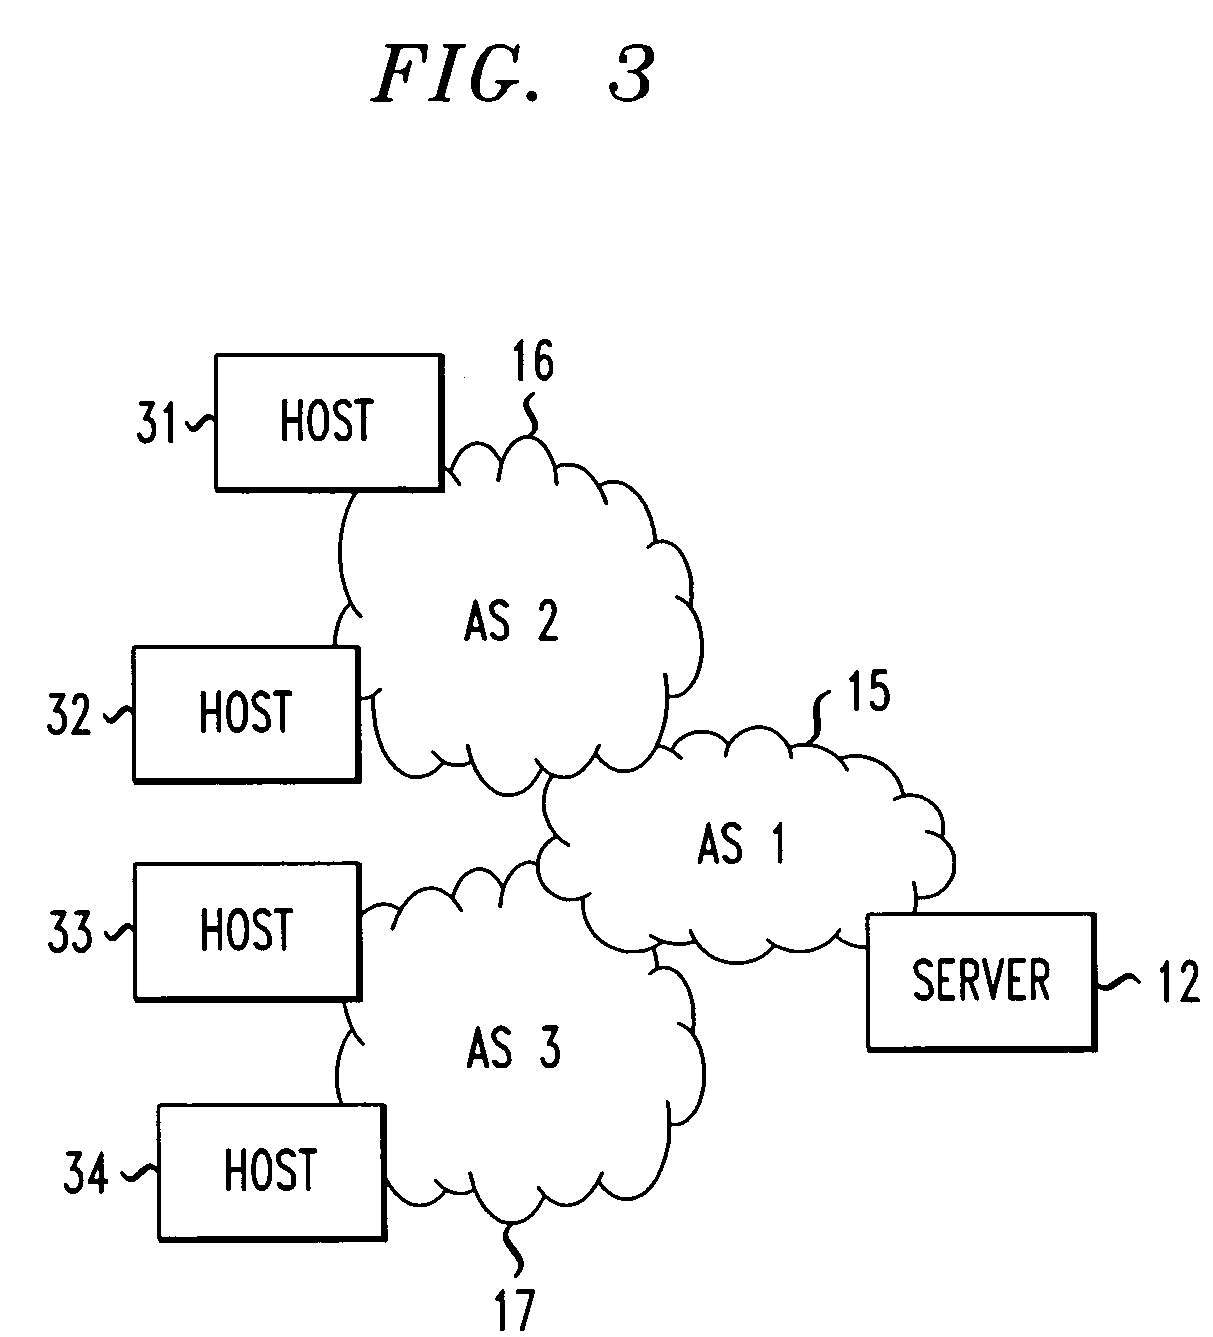 Path analysis tool and method in a data transmission network including several internet autonomous systems